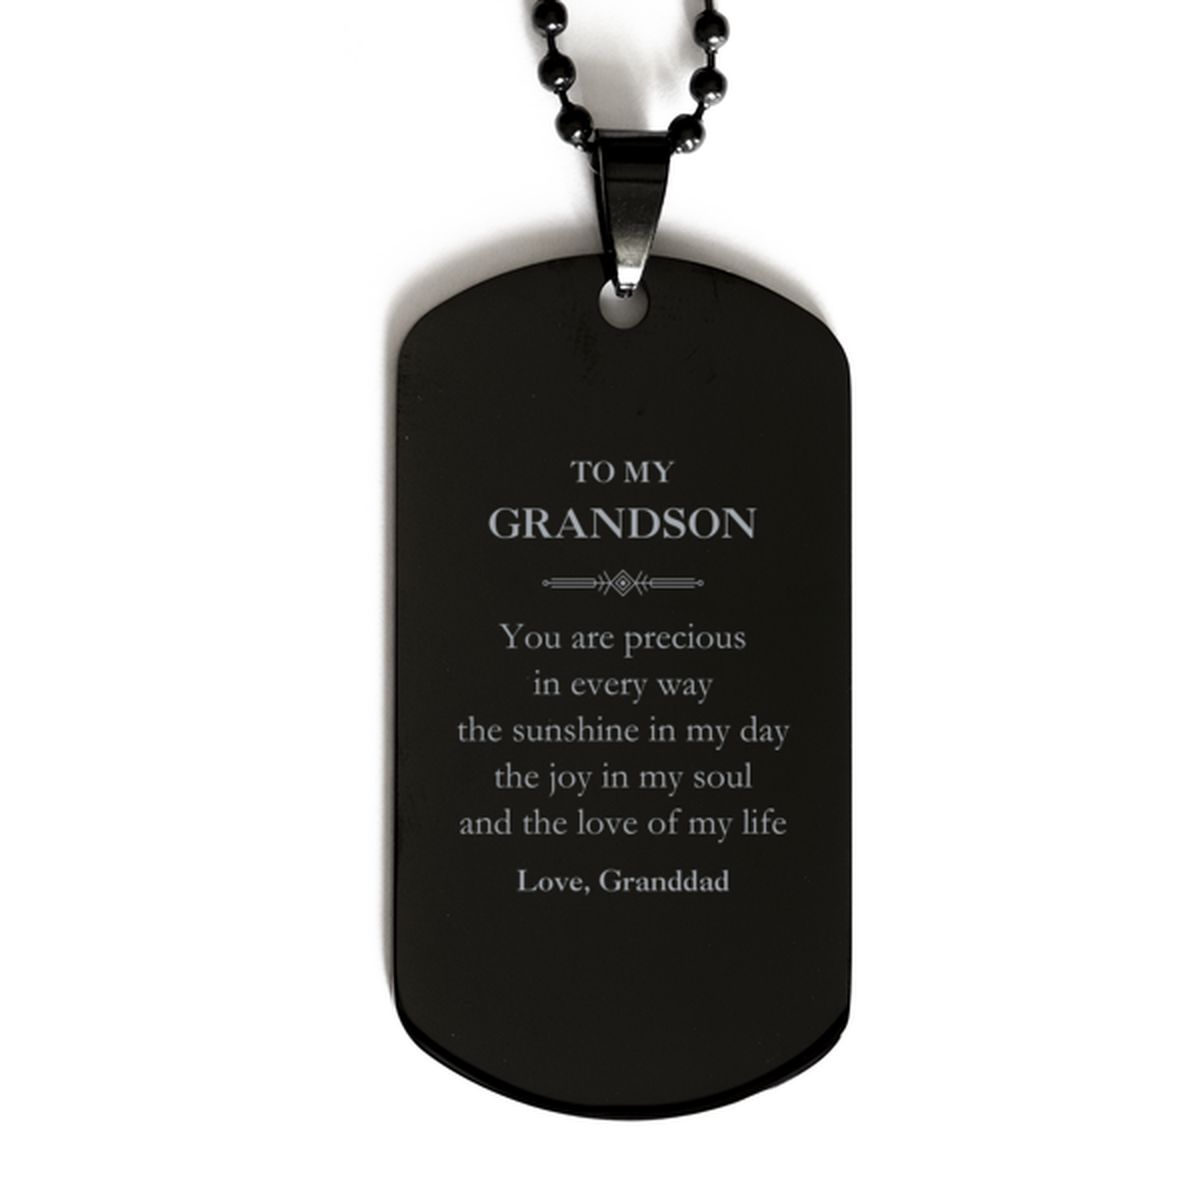 Graduation Gifts for Grandson Black Dog Tag Present from Granddad, Christmas Grandson Birthday Gifts Grandson You are precious in every way the sunshine in my day. Love, Granddad